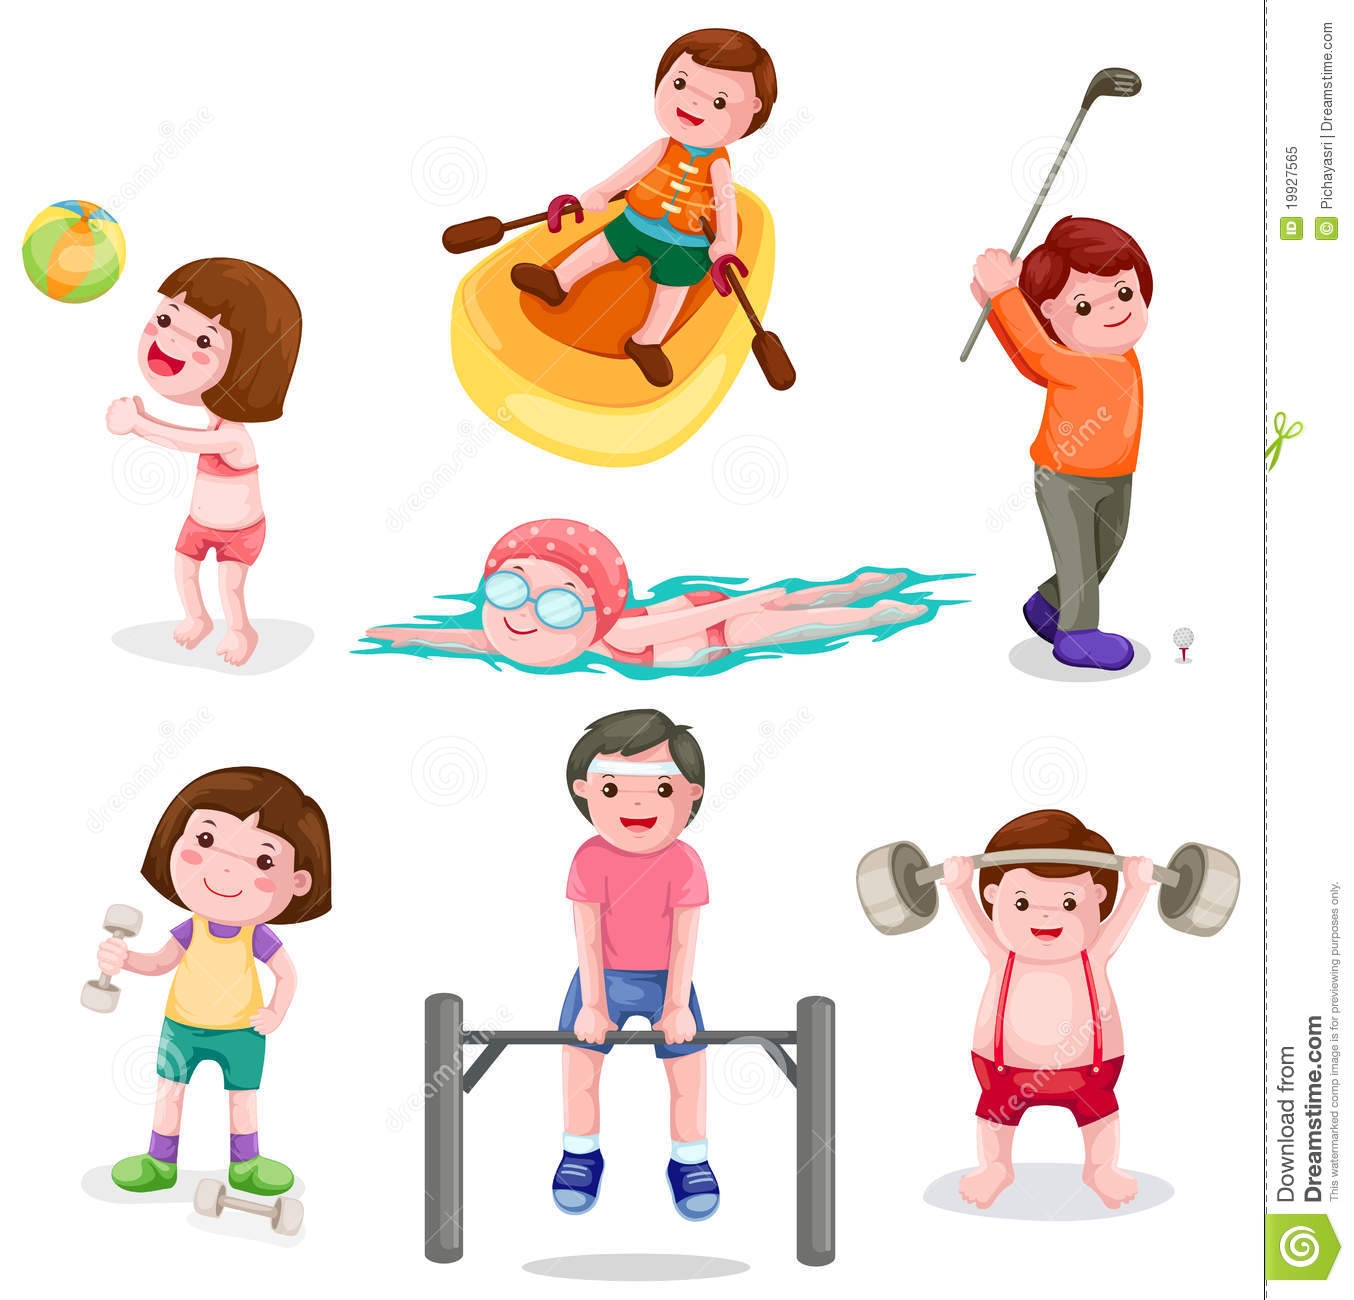 Physical activity images.